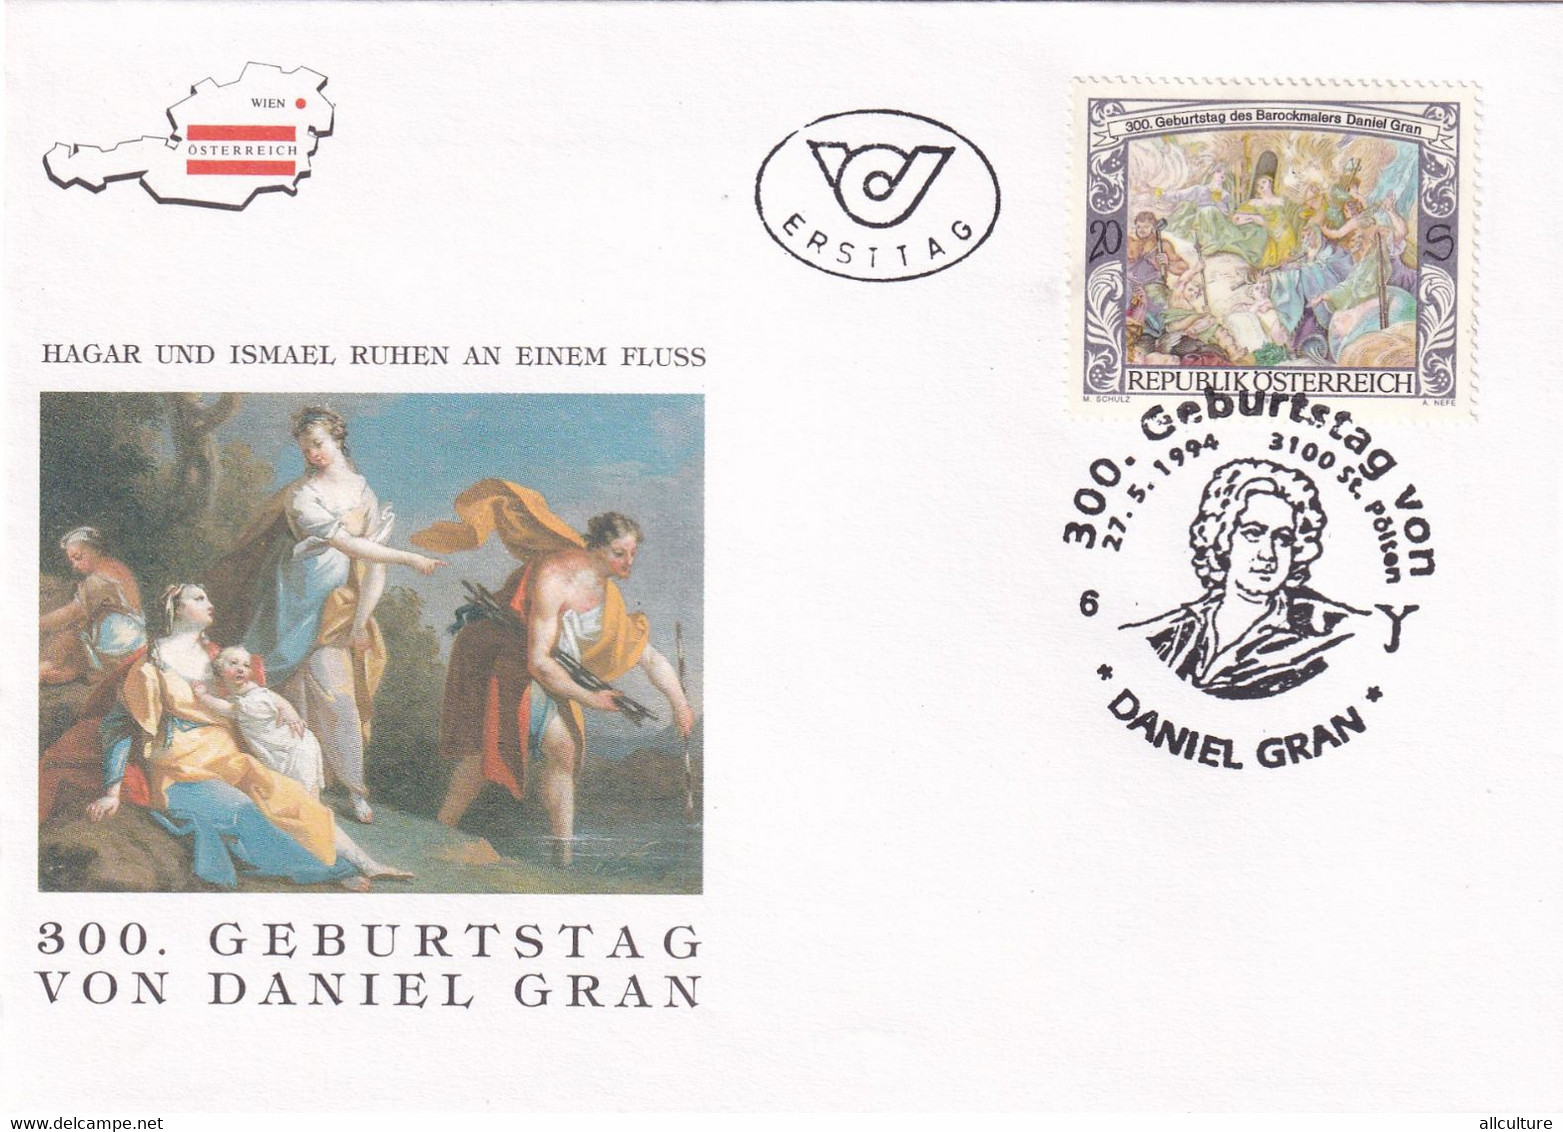 A8393- ERSTTAG DANIEL GRAN PAINTINGS, WEIN 1994 REPUBLIC OSTERREICH AUSTRIA USED STAMP ON COVER - Lettres & Documents